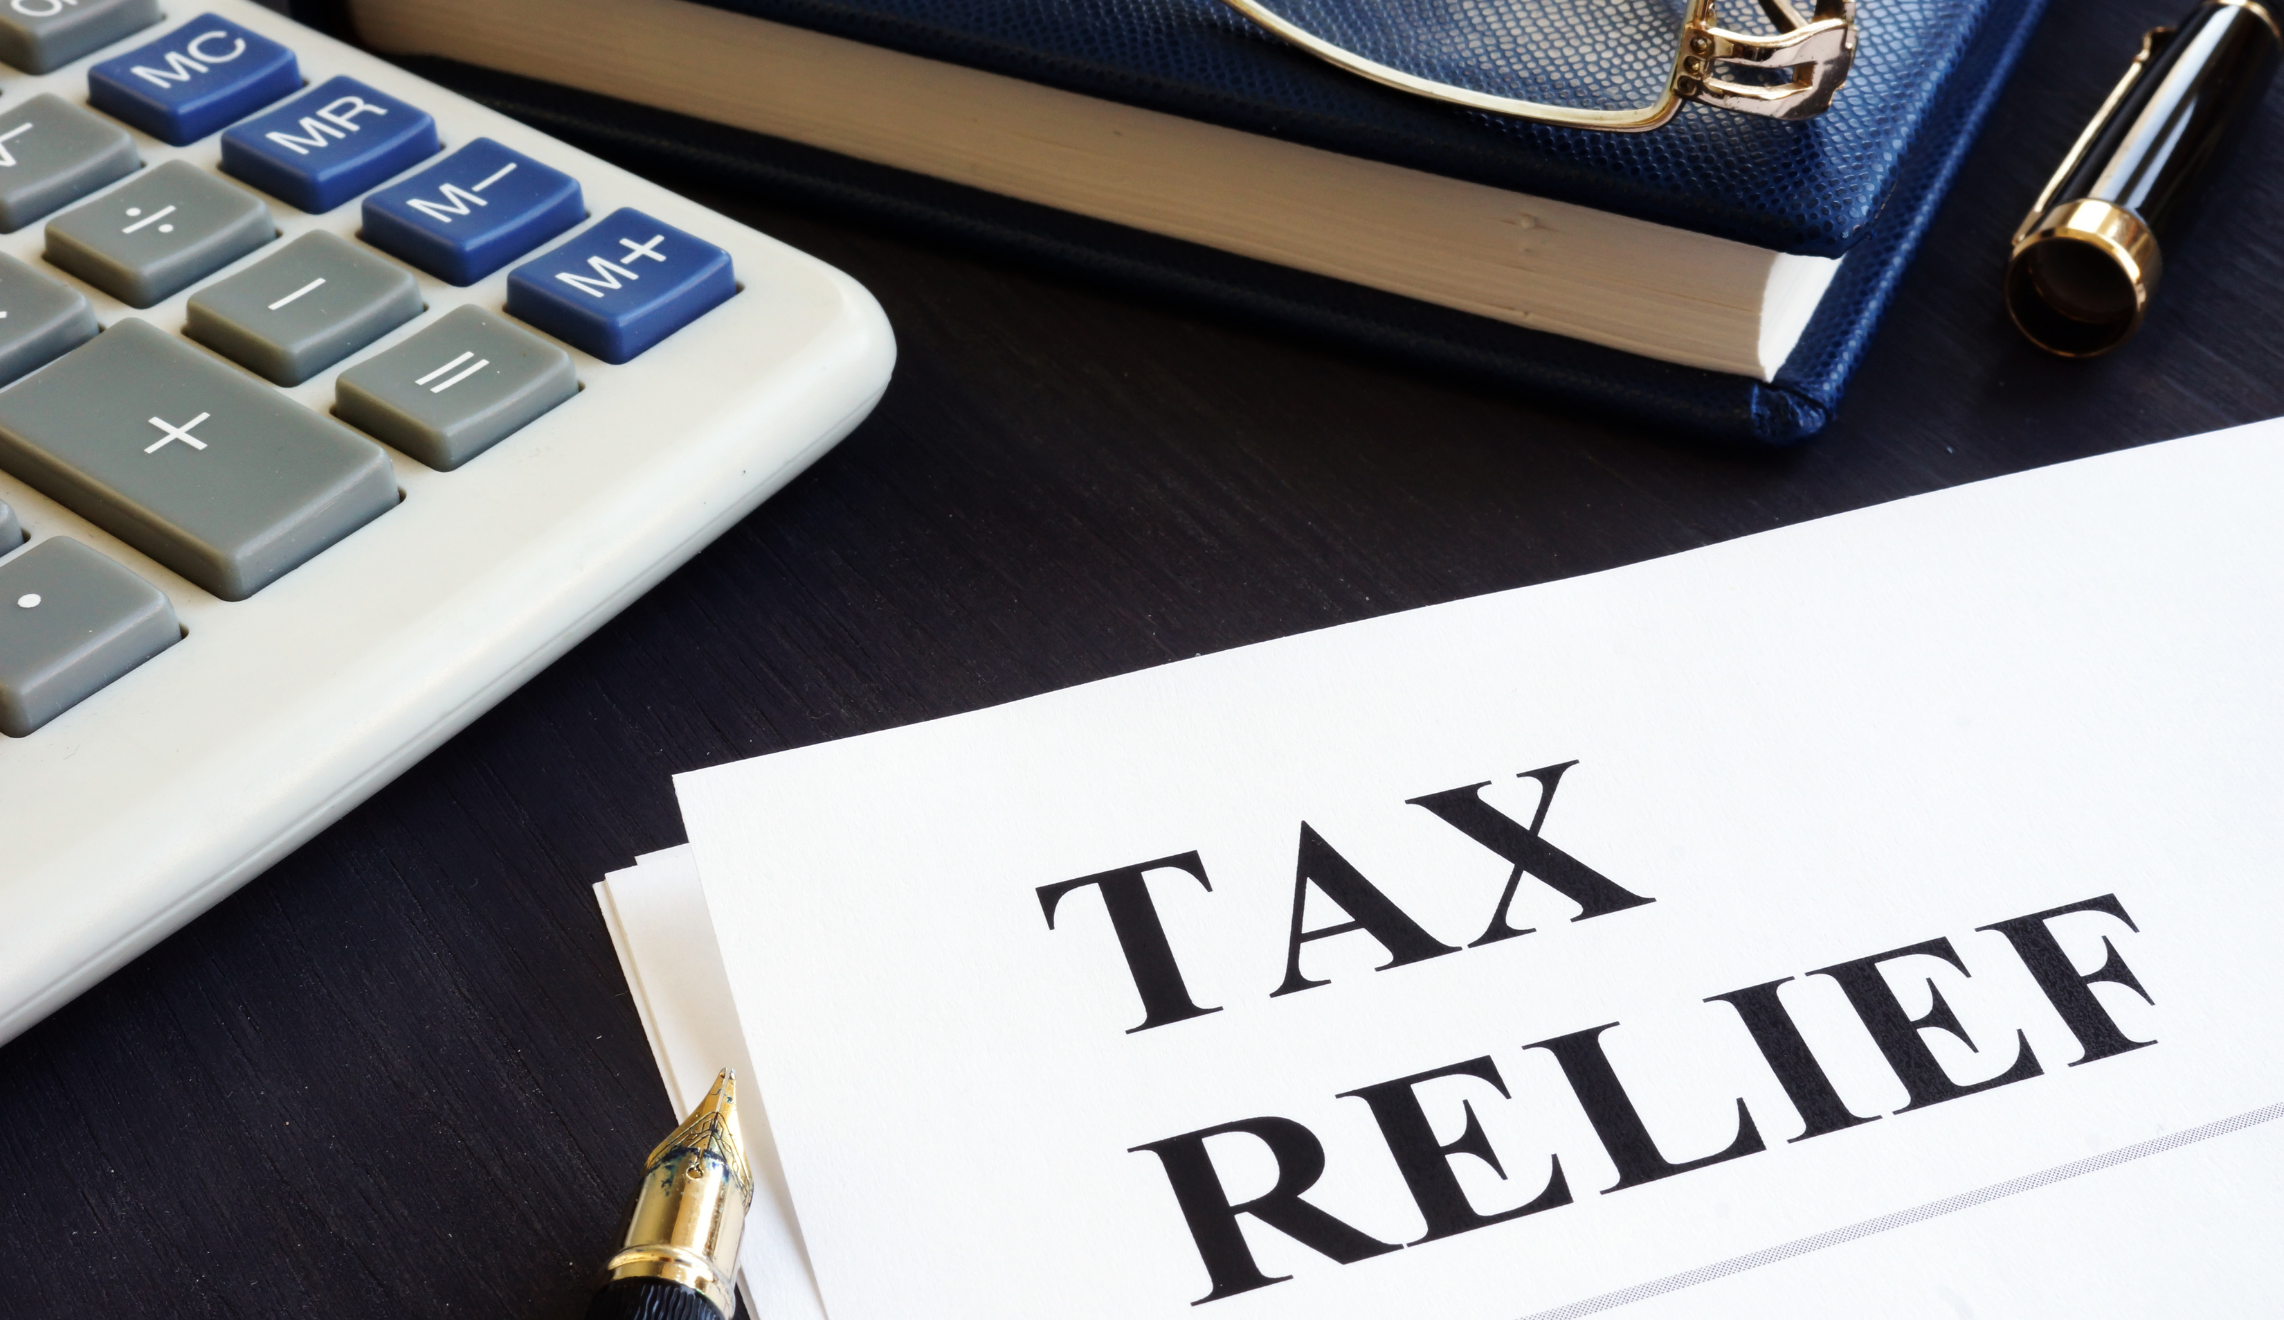 New HMRC R&D tax relief guidance 'could be clearer', says ICAEW Banner Photo